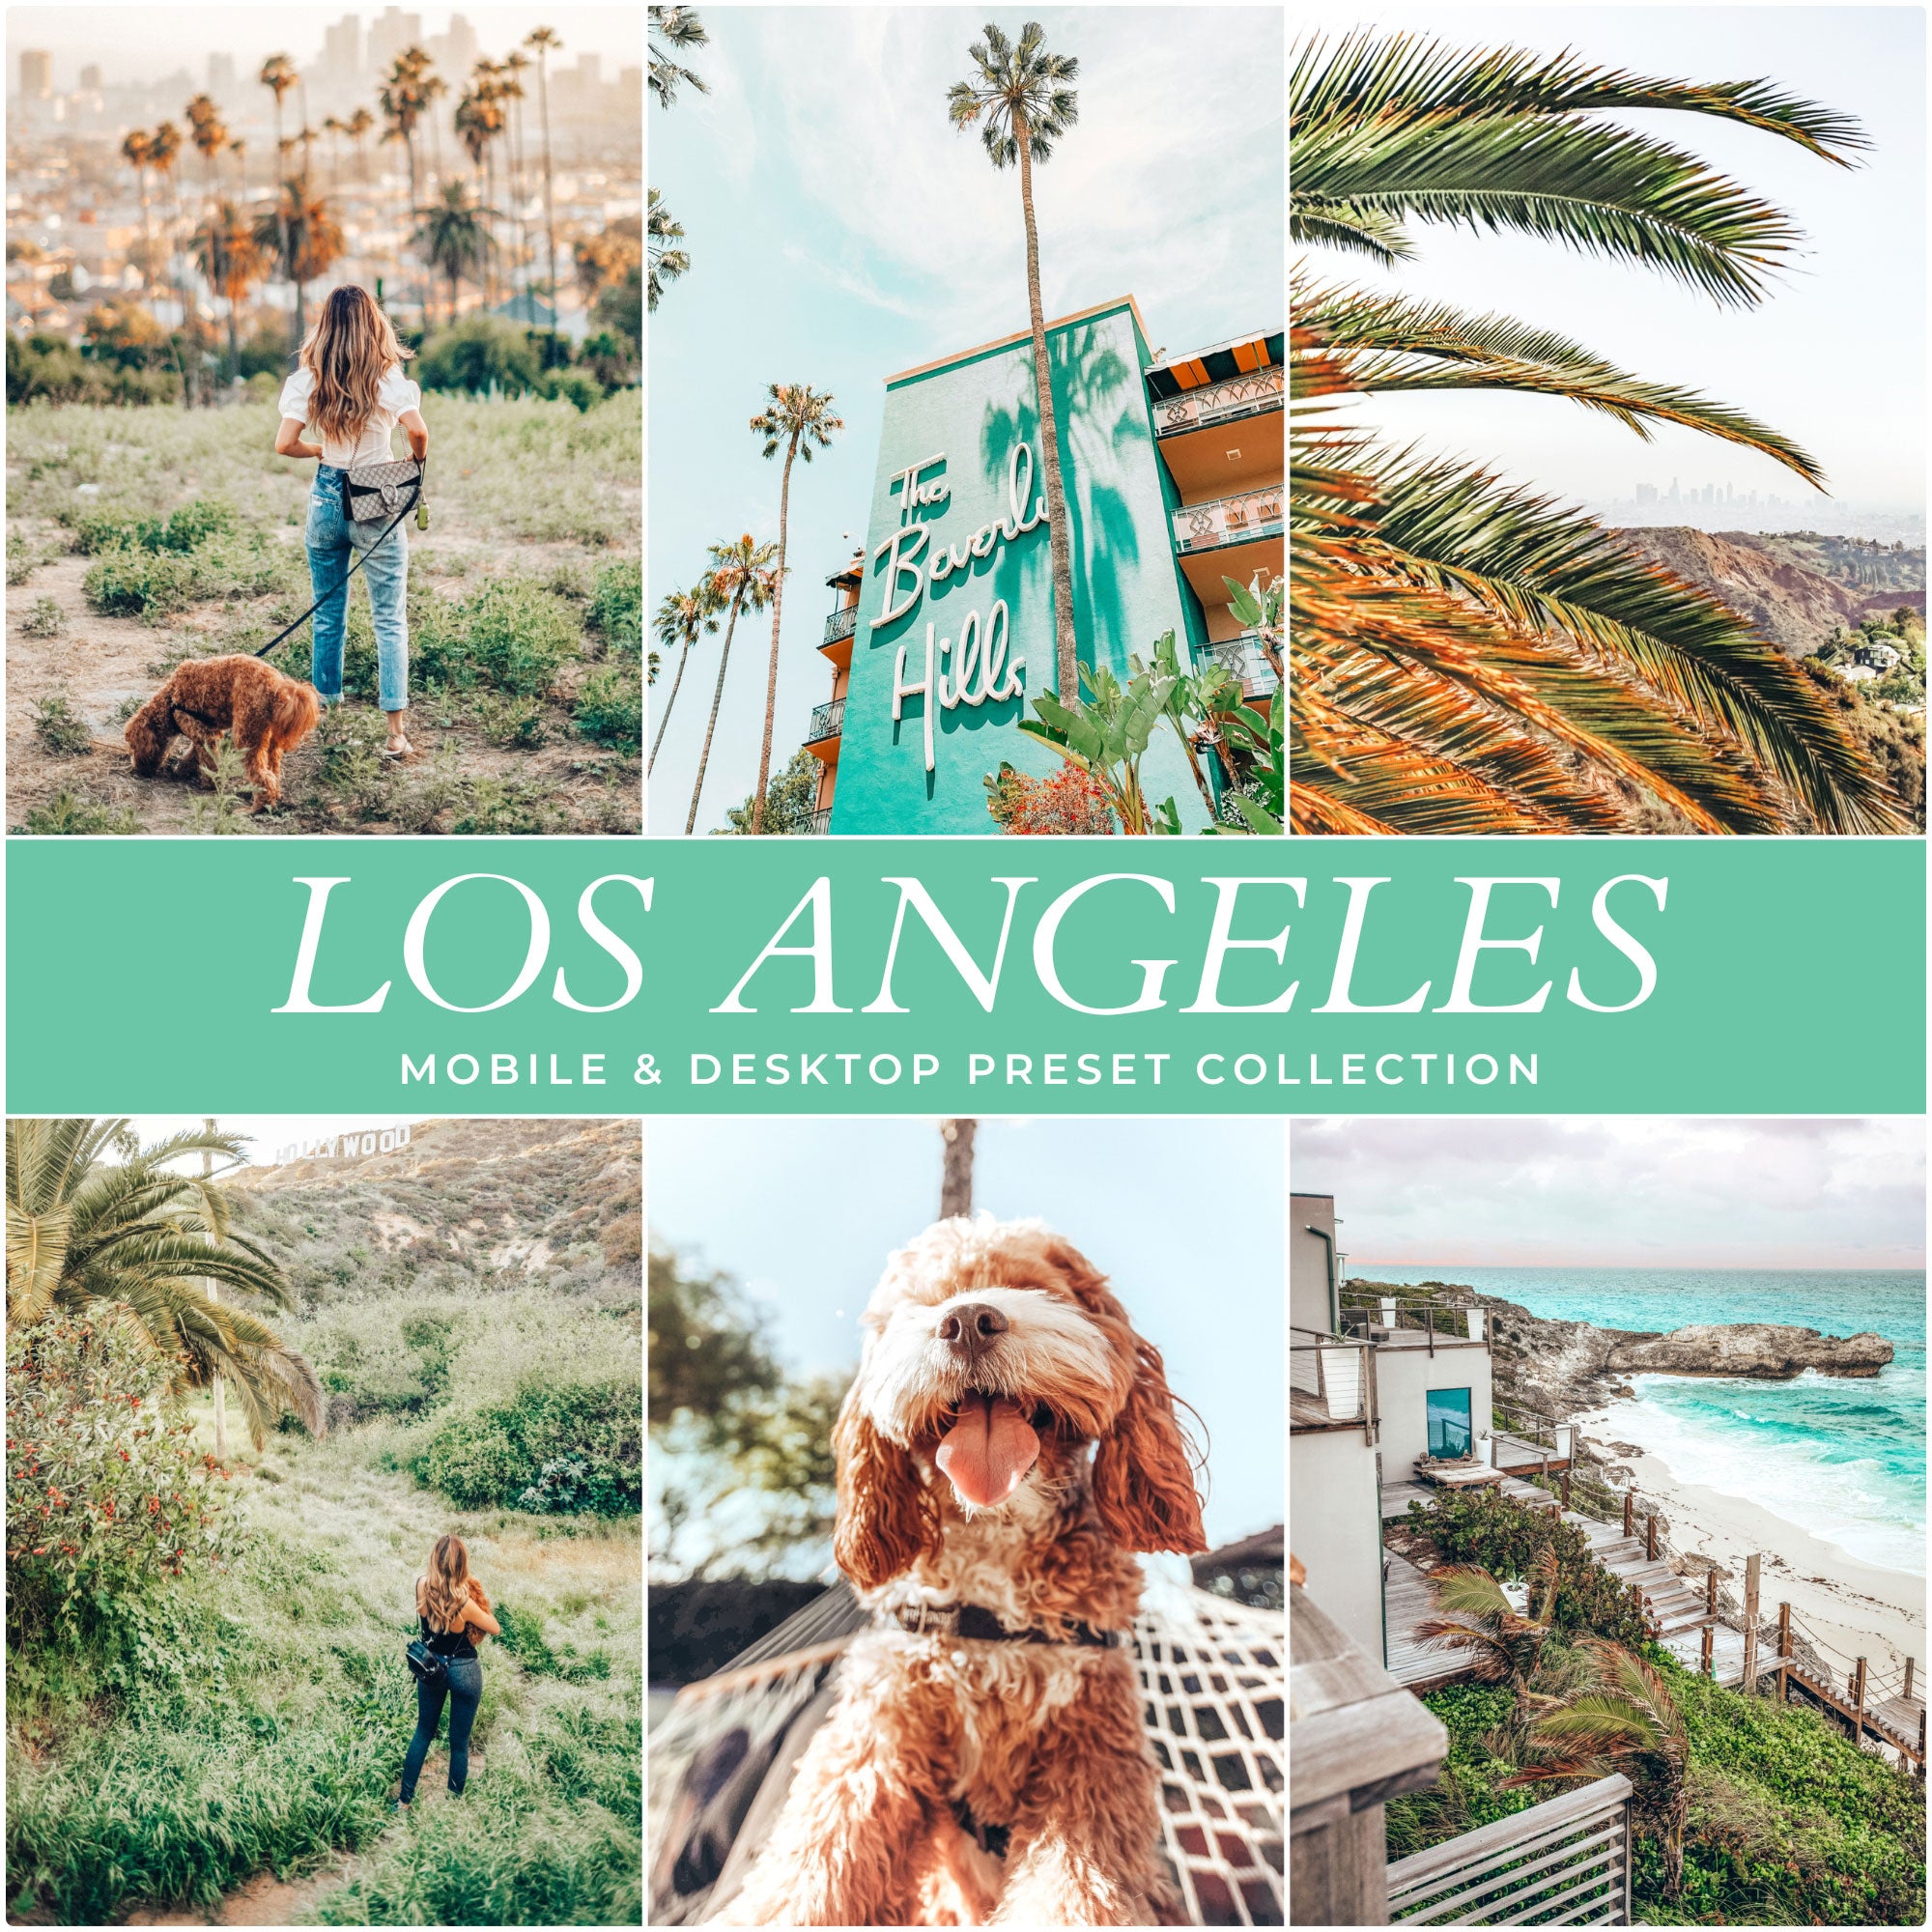 Los Angeles Travel Lightroom Presets For Photographers and Instagram Influencers Photo Editing In Adobe Lightroom By Lou And Marks Presets